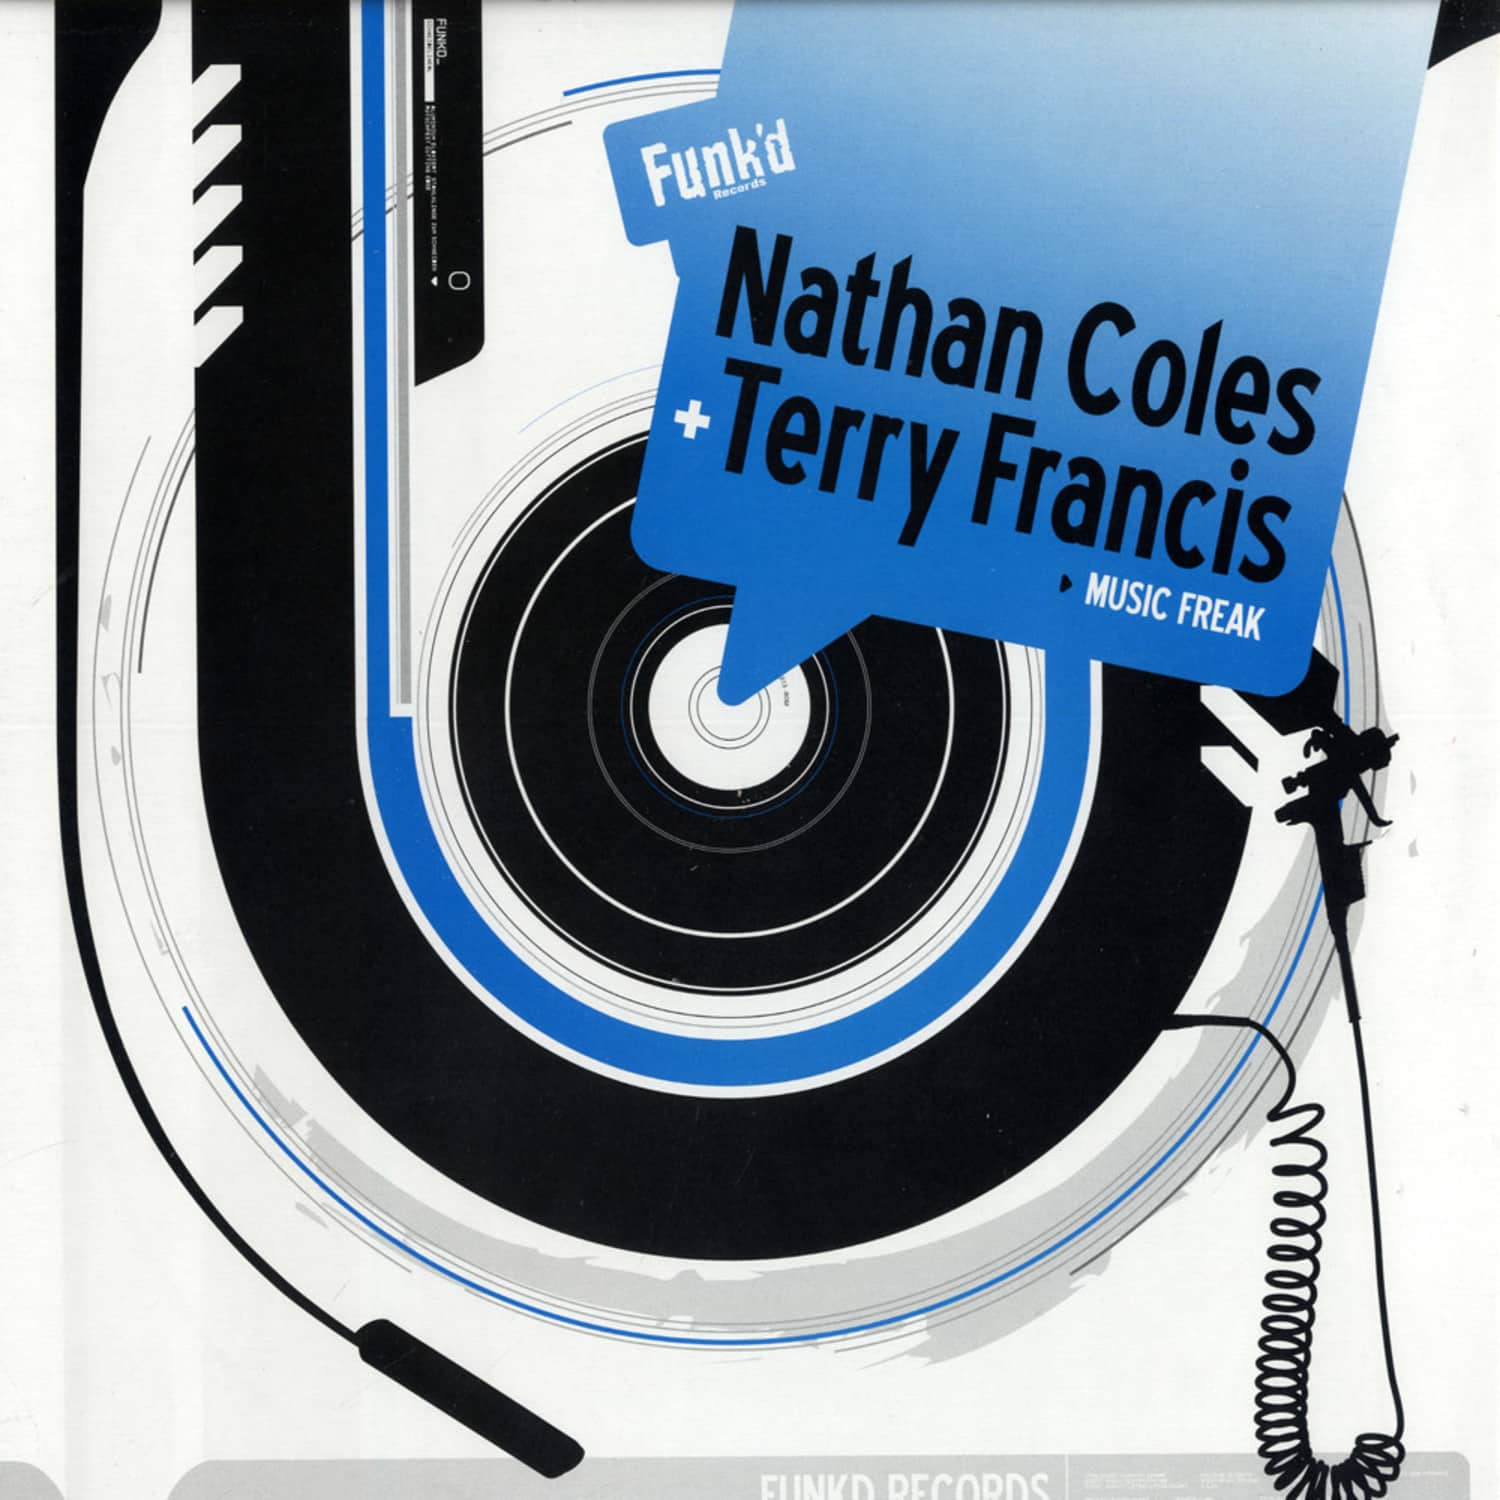 Nathan Coles & Terry Francis - MUSIC FREAK